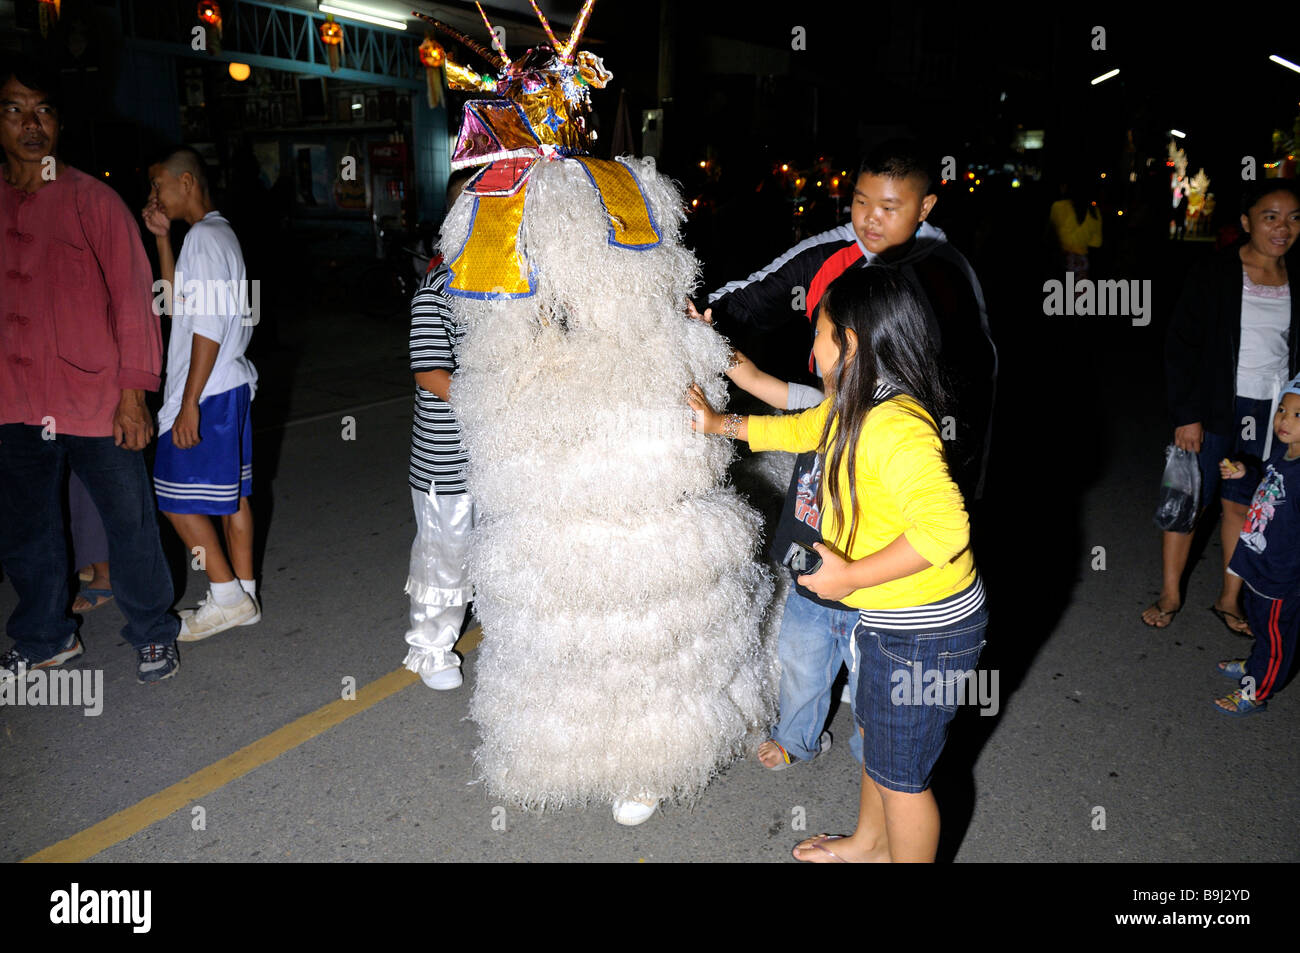 Loi Krathong, festival of light, float and costumes in a parade through the city centre, Mae Sariang, Thailand, Asia Stock Photo